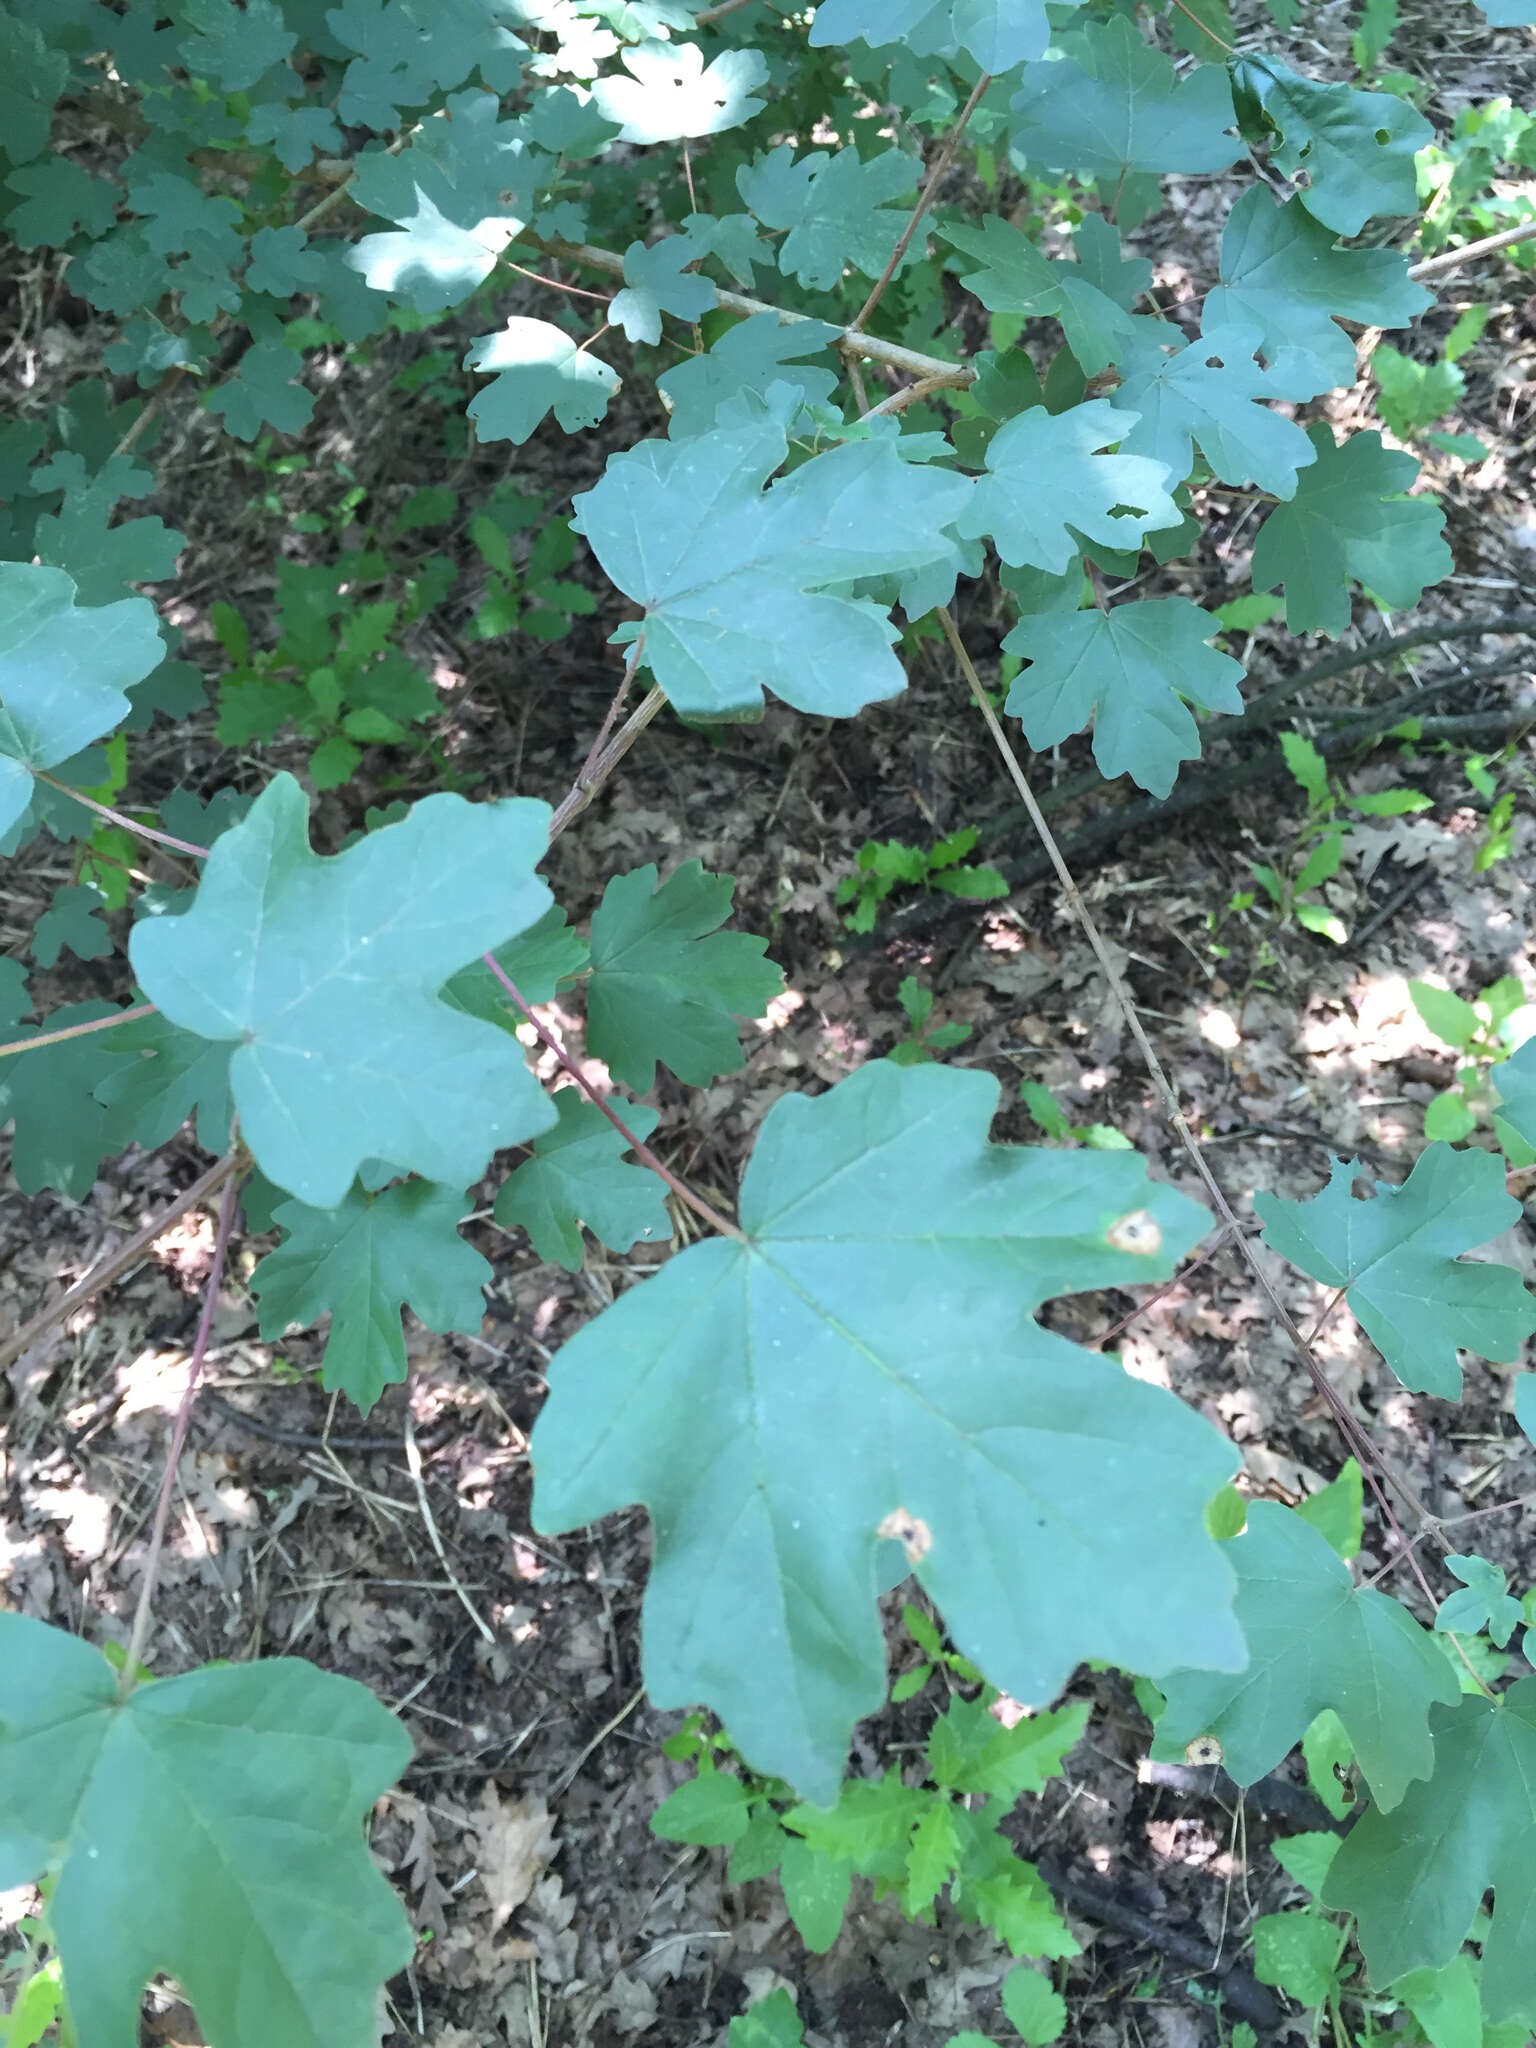 Image of Field Maple